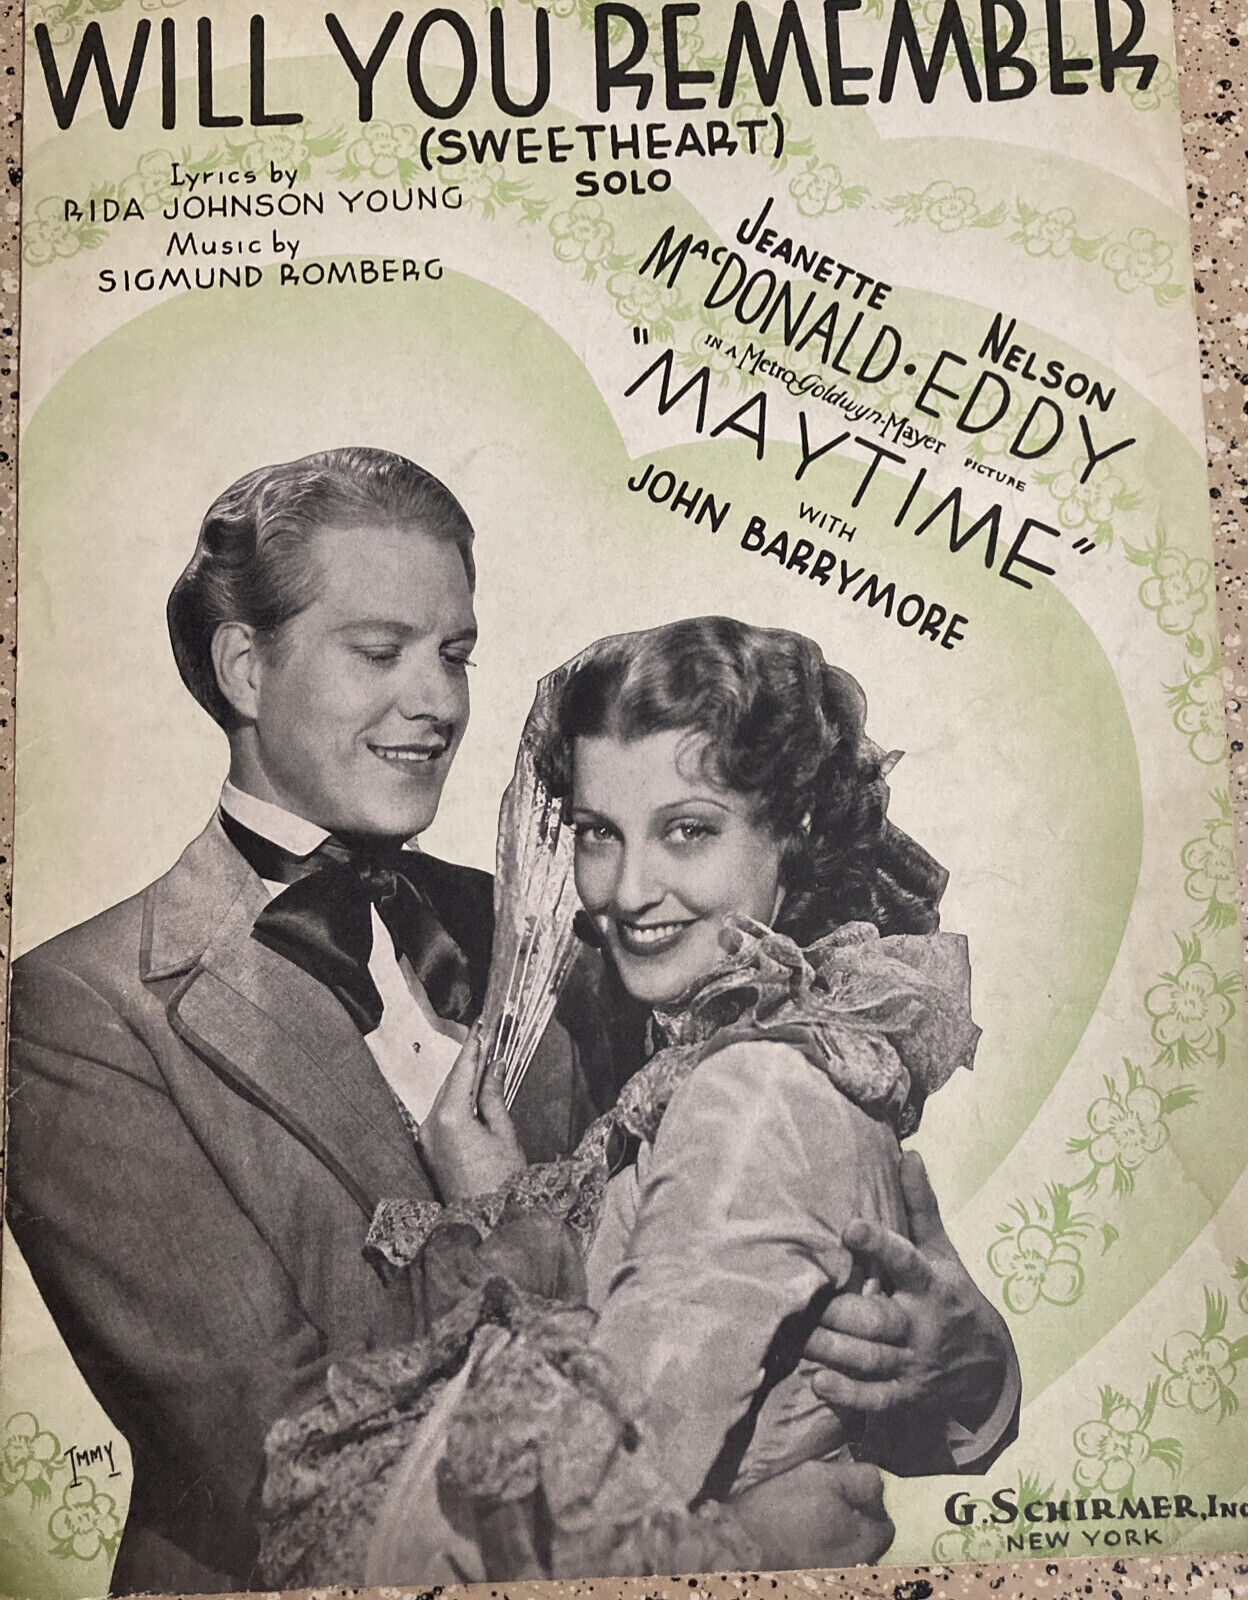 VINTAGE SHEET MUSIC WILL YOU REMEMBER SWEETHEART SOLO JEANETTE MACDONALD 1937